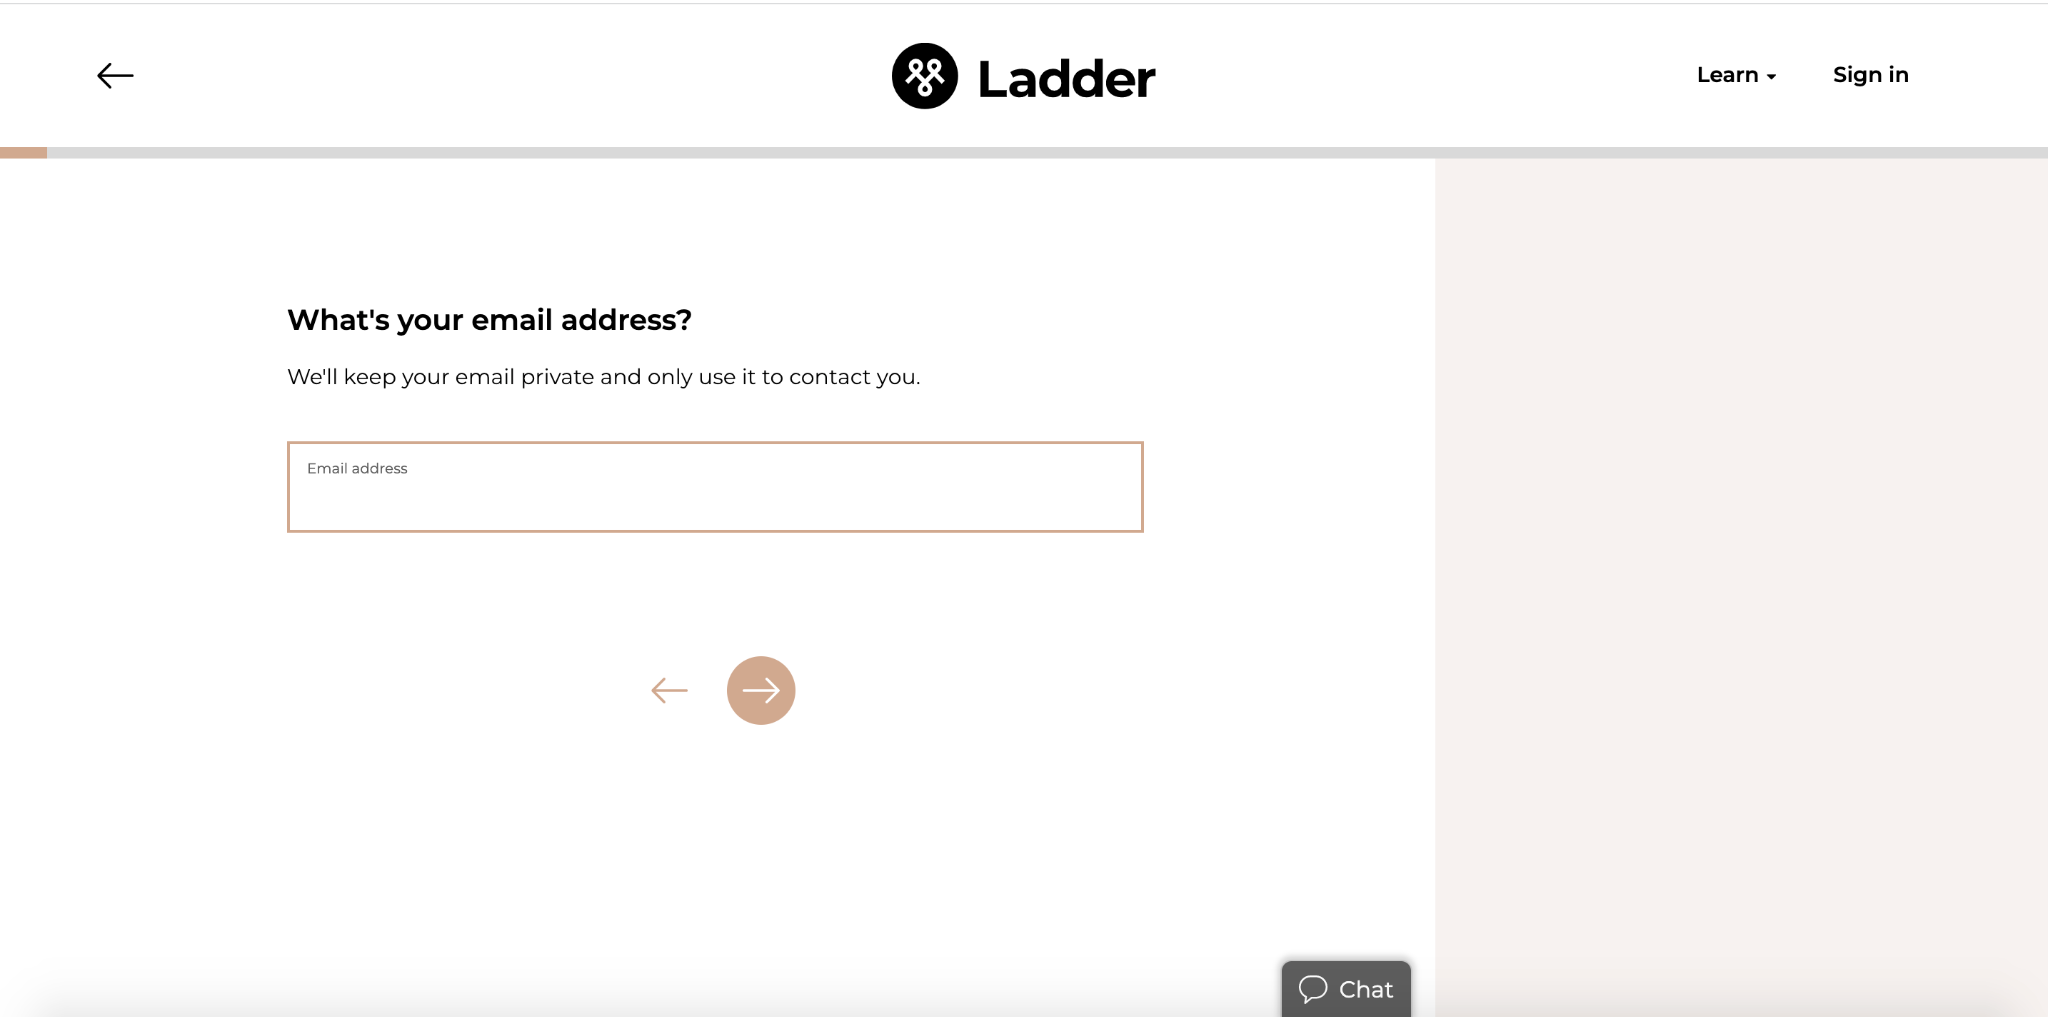 Ladder insurance multi step form with email address